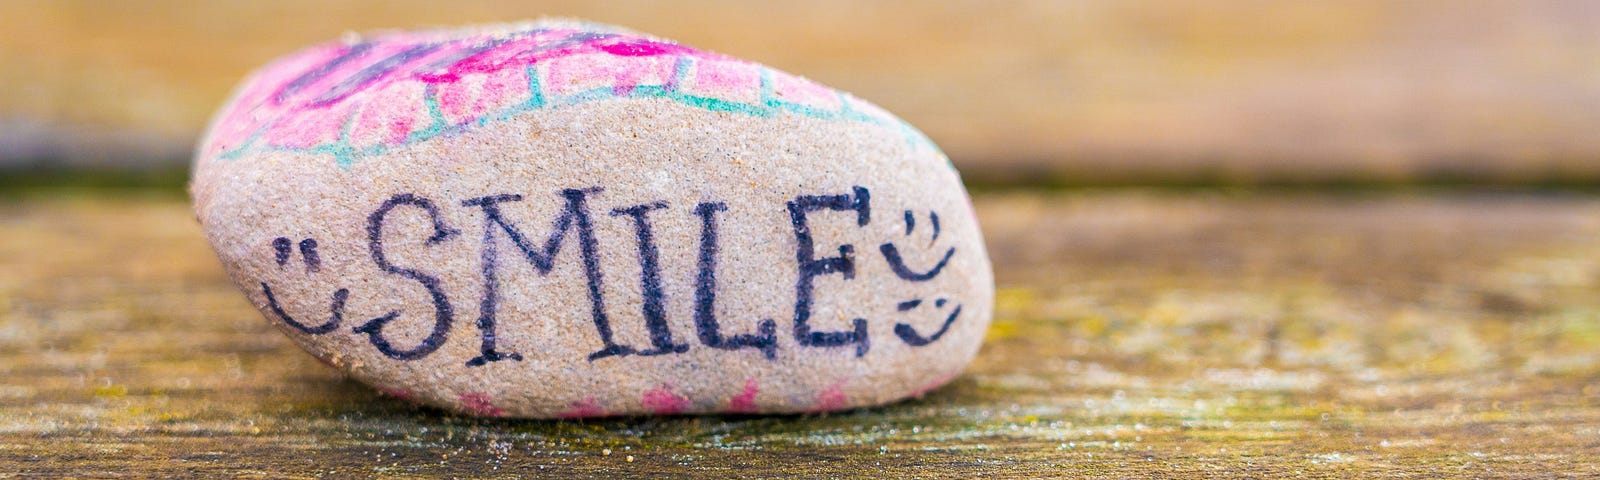 A stone with smile word written on it